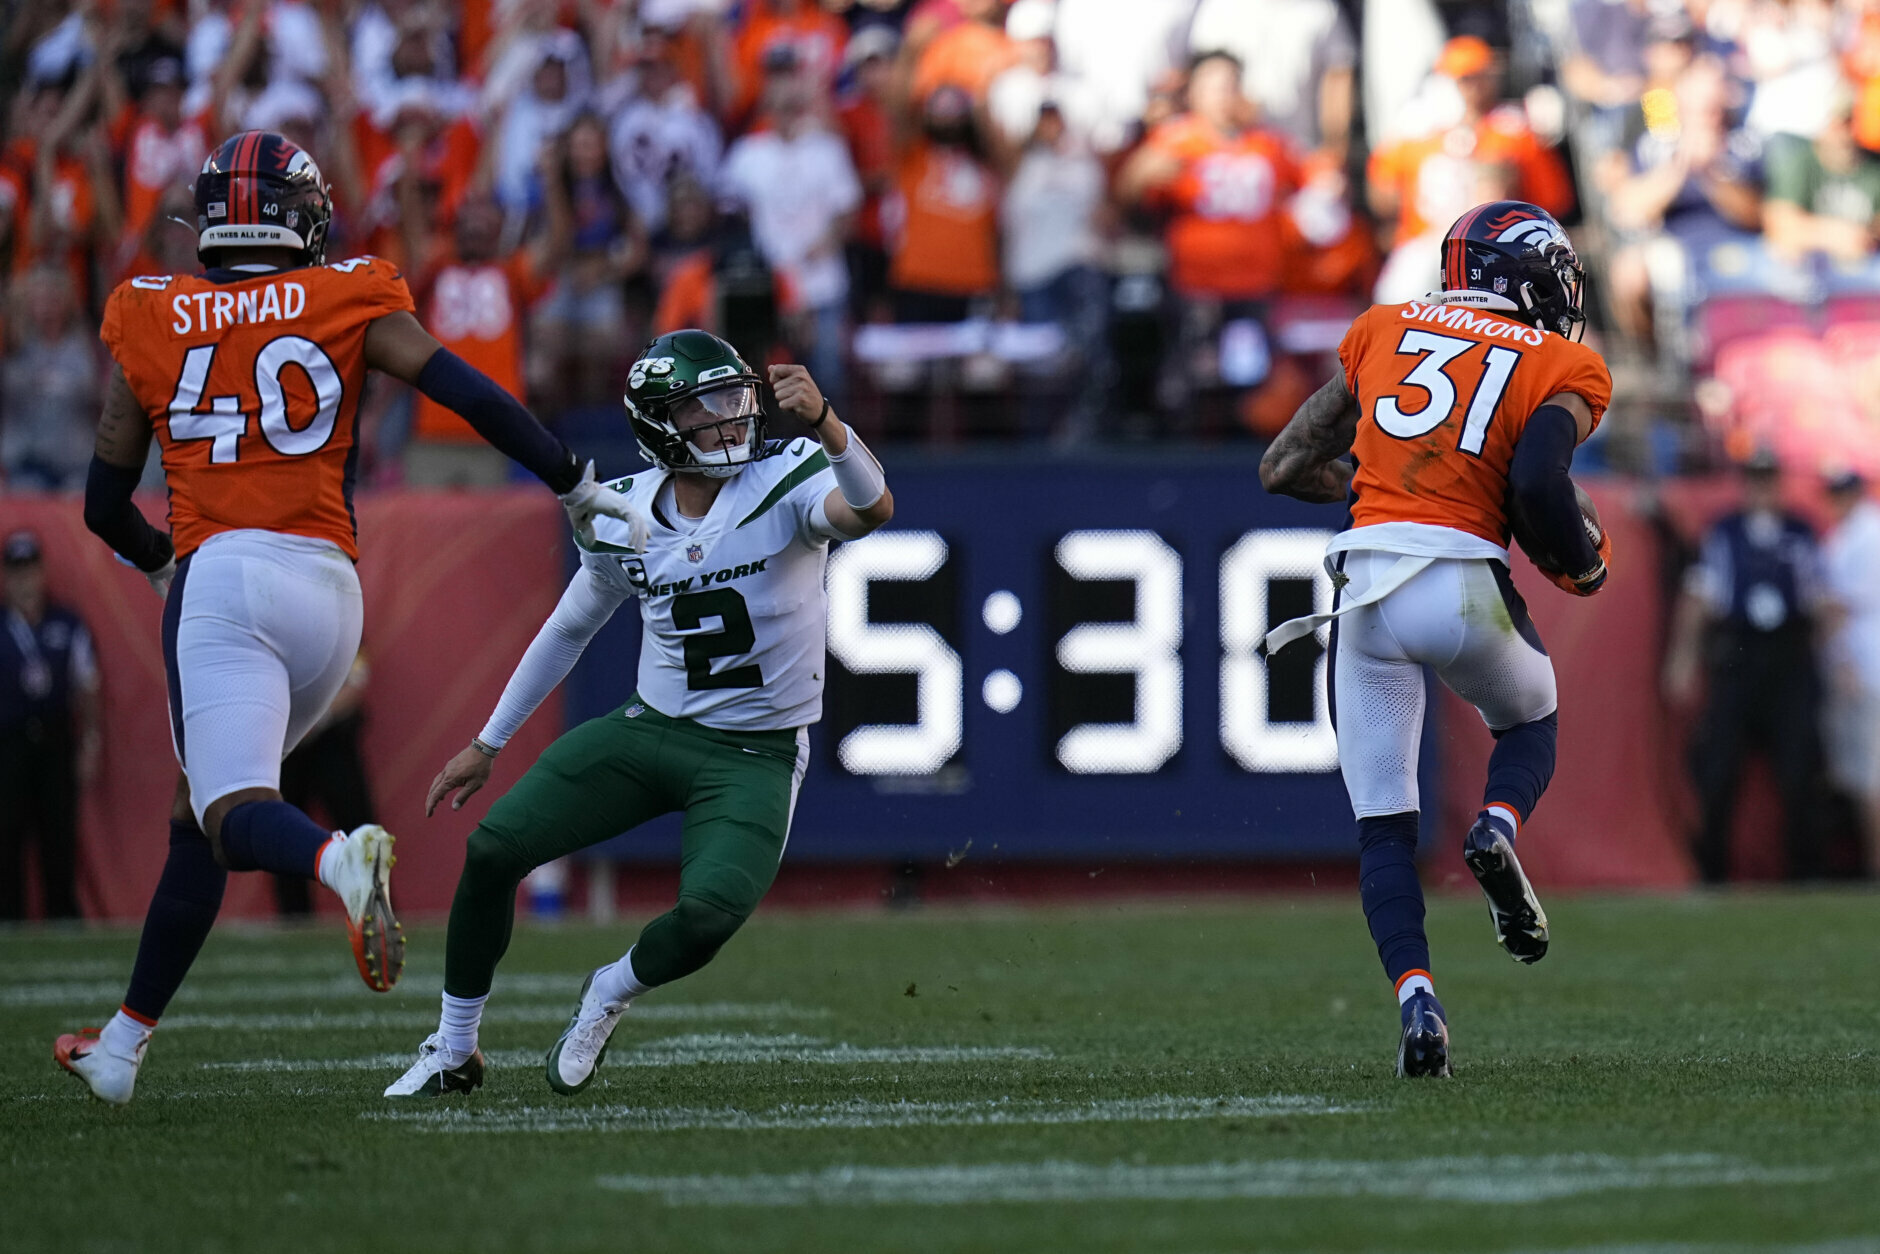 <p><em><strong>Jets 0</strong></em><br />
<em><strong>Broncos 26</strong></em></p>
<p>Denver is 3-0 for the first time in five years but it bears pointing out their early-season schedule has been marshmallowey soft. With games against the rival Raiders and the AFC North sans Cincinnati, we&#8217;re about to find out how good these Broncos really are.</p>
<p>But after 12 straight September losses, we know how bad the Jets are &#8212; and they&#8217;re about to match the NFL record of 13 straight losses in the month when Tennessee comes and takes a bite out of New York in the Big Apple.</p>
